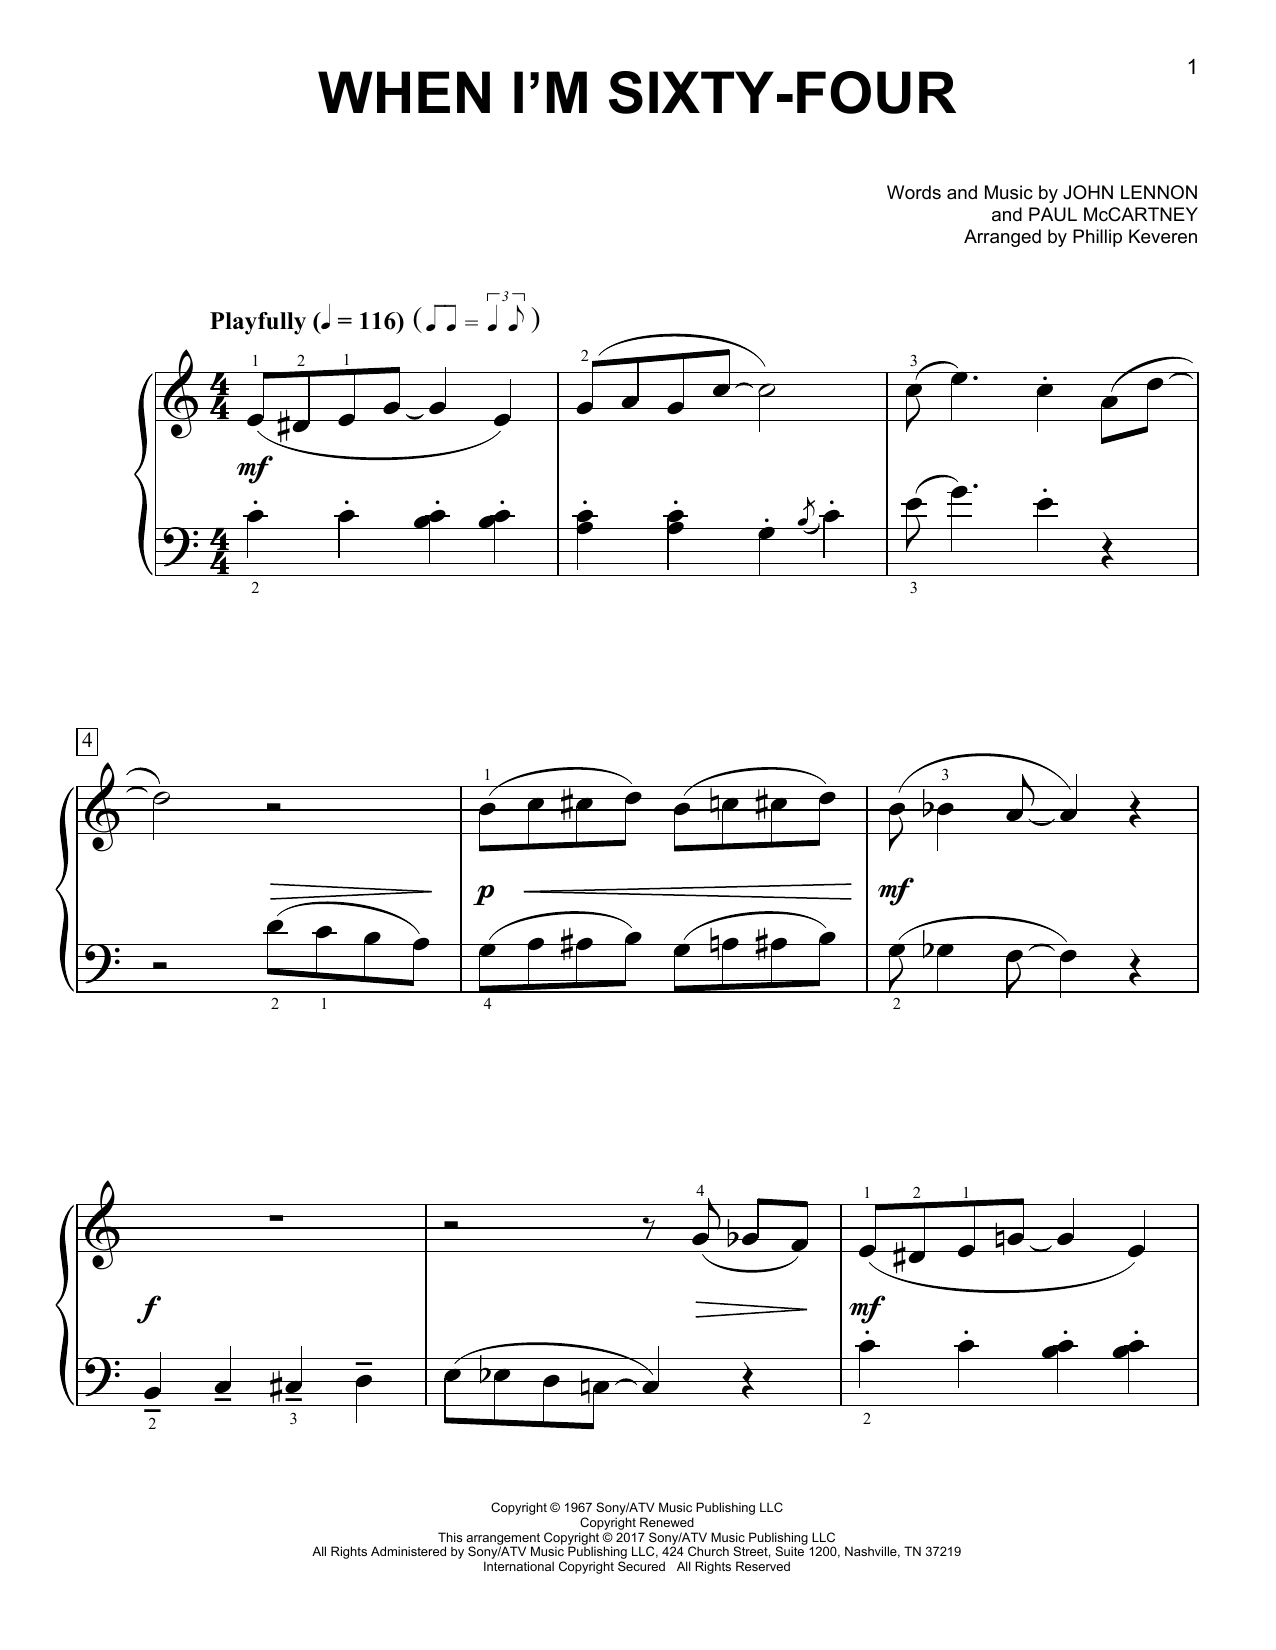 Download The Beatles When I'm Sixty-Four [Classical version] Sheet Music